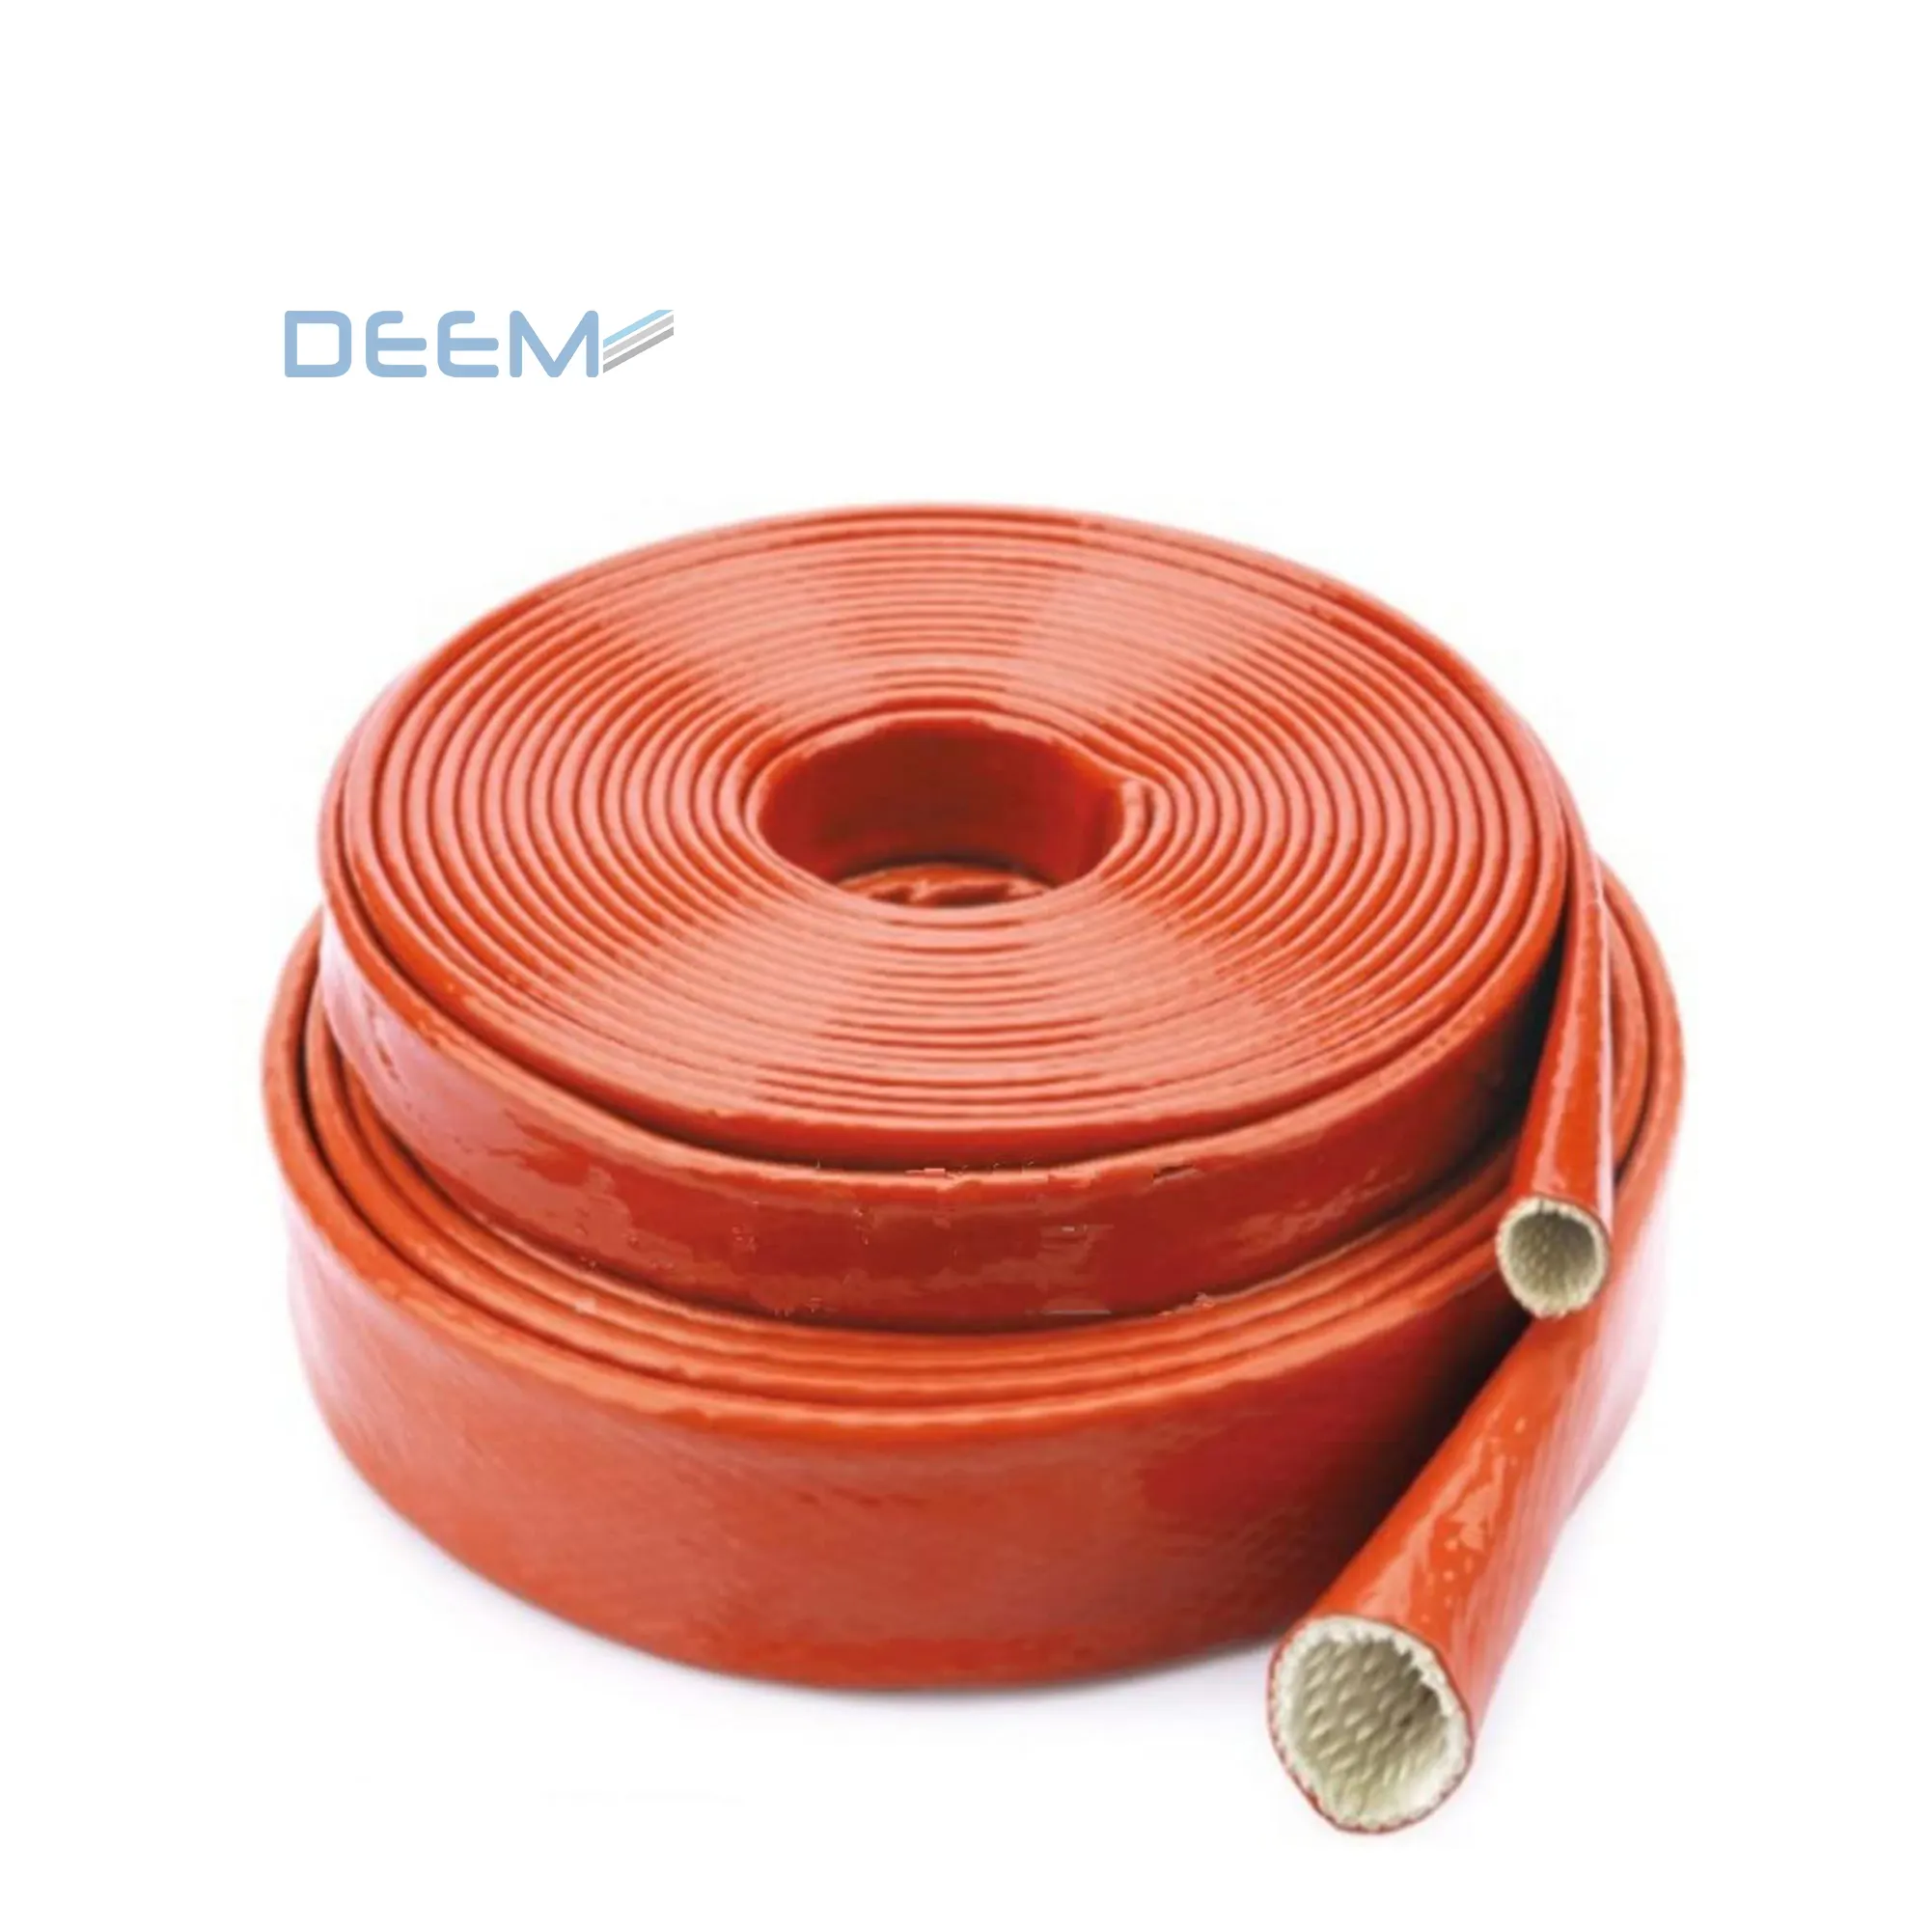 DEEM Fluids Resistant insulation silicone fiberglass sleeve for pipe protection